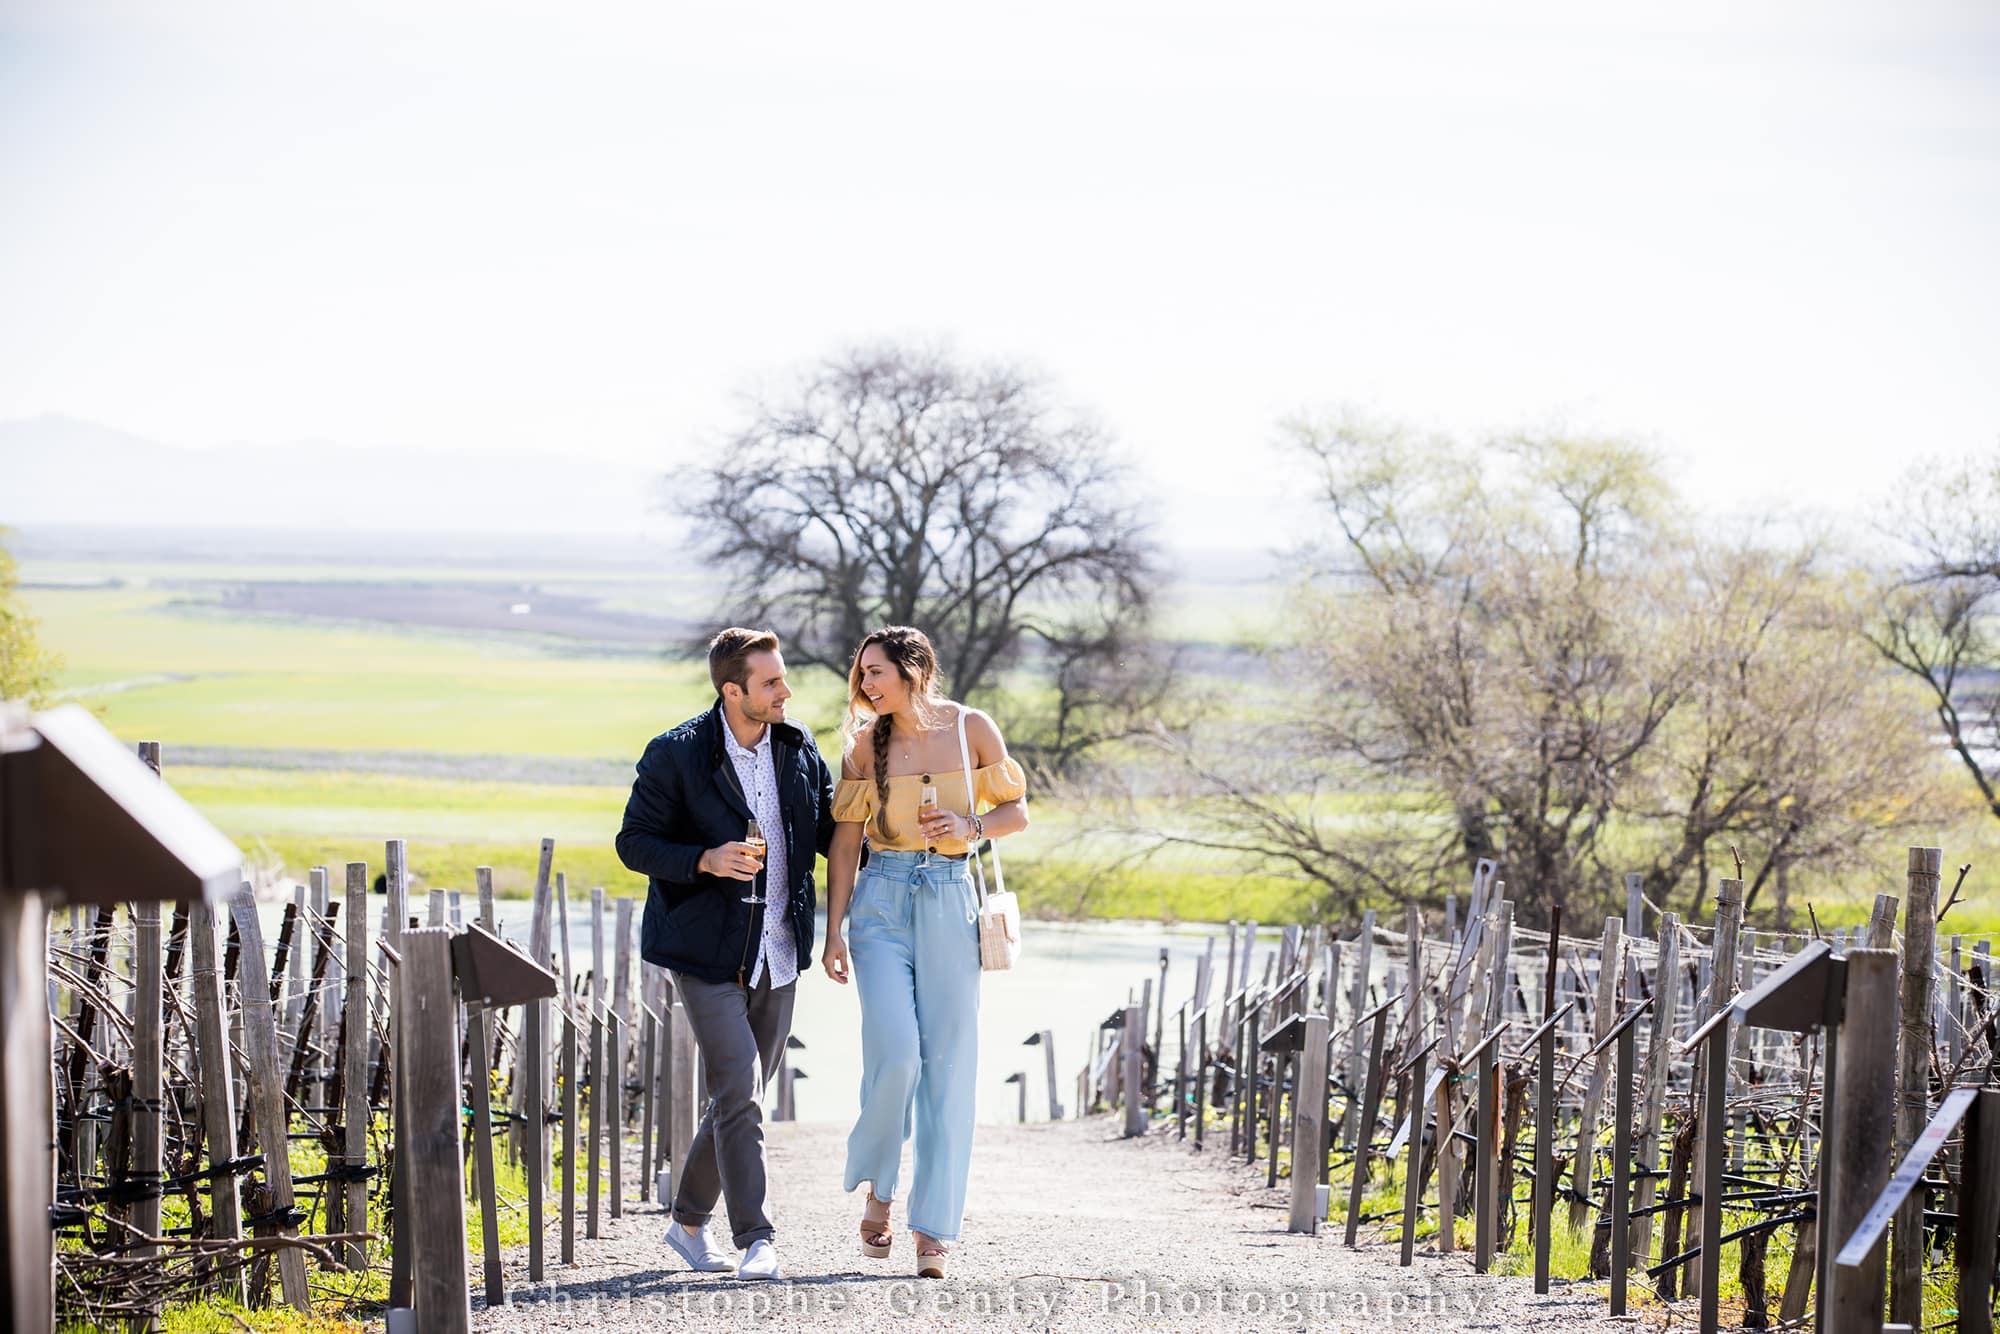 Best Proposal wineries in Sonoma ca - Ram's Gate winery